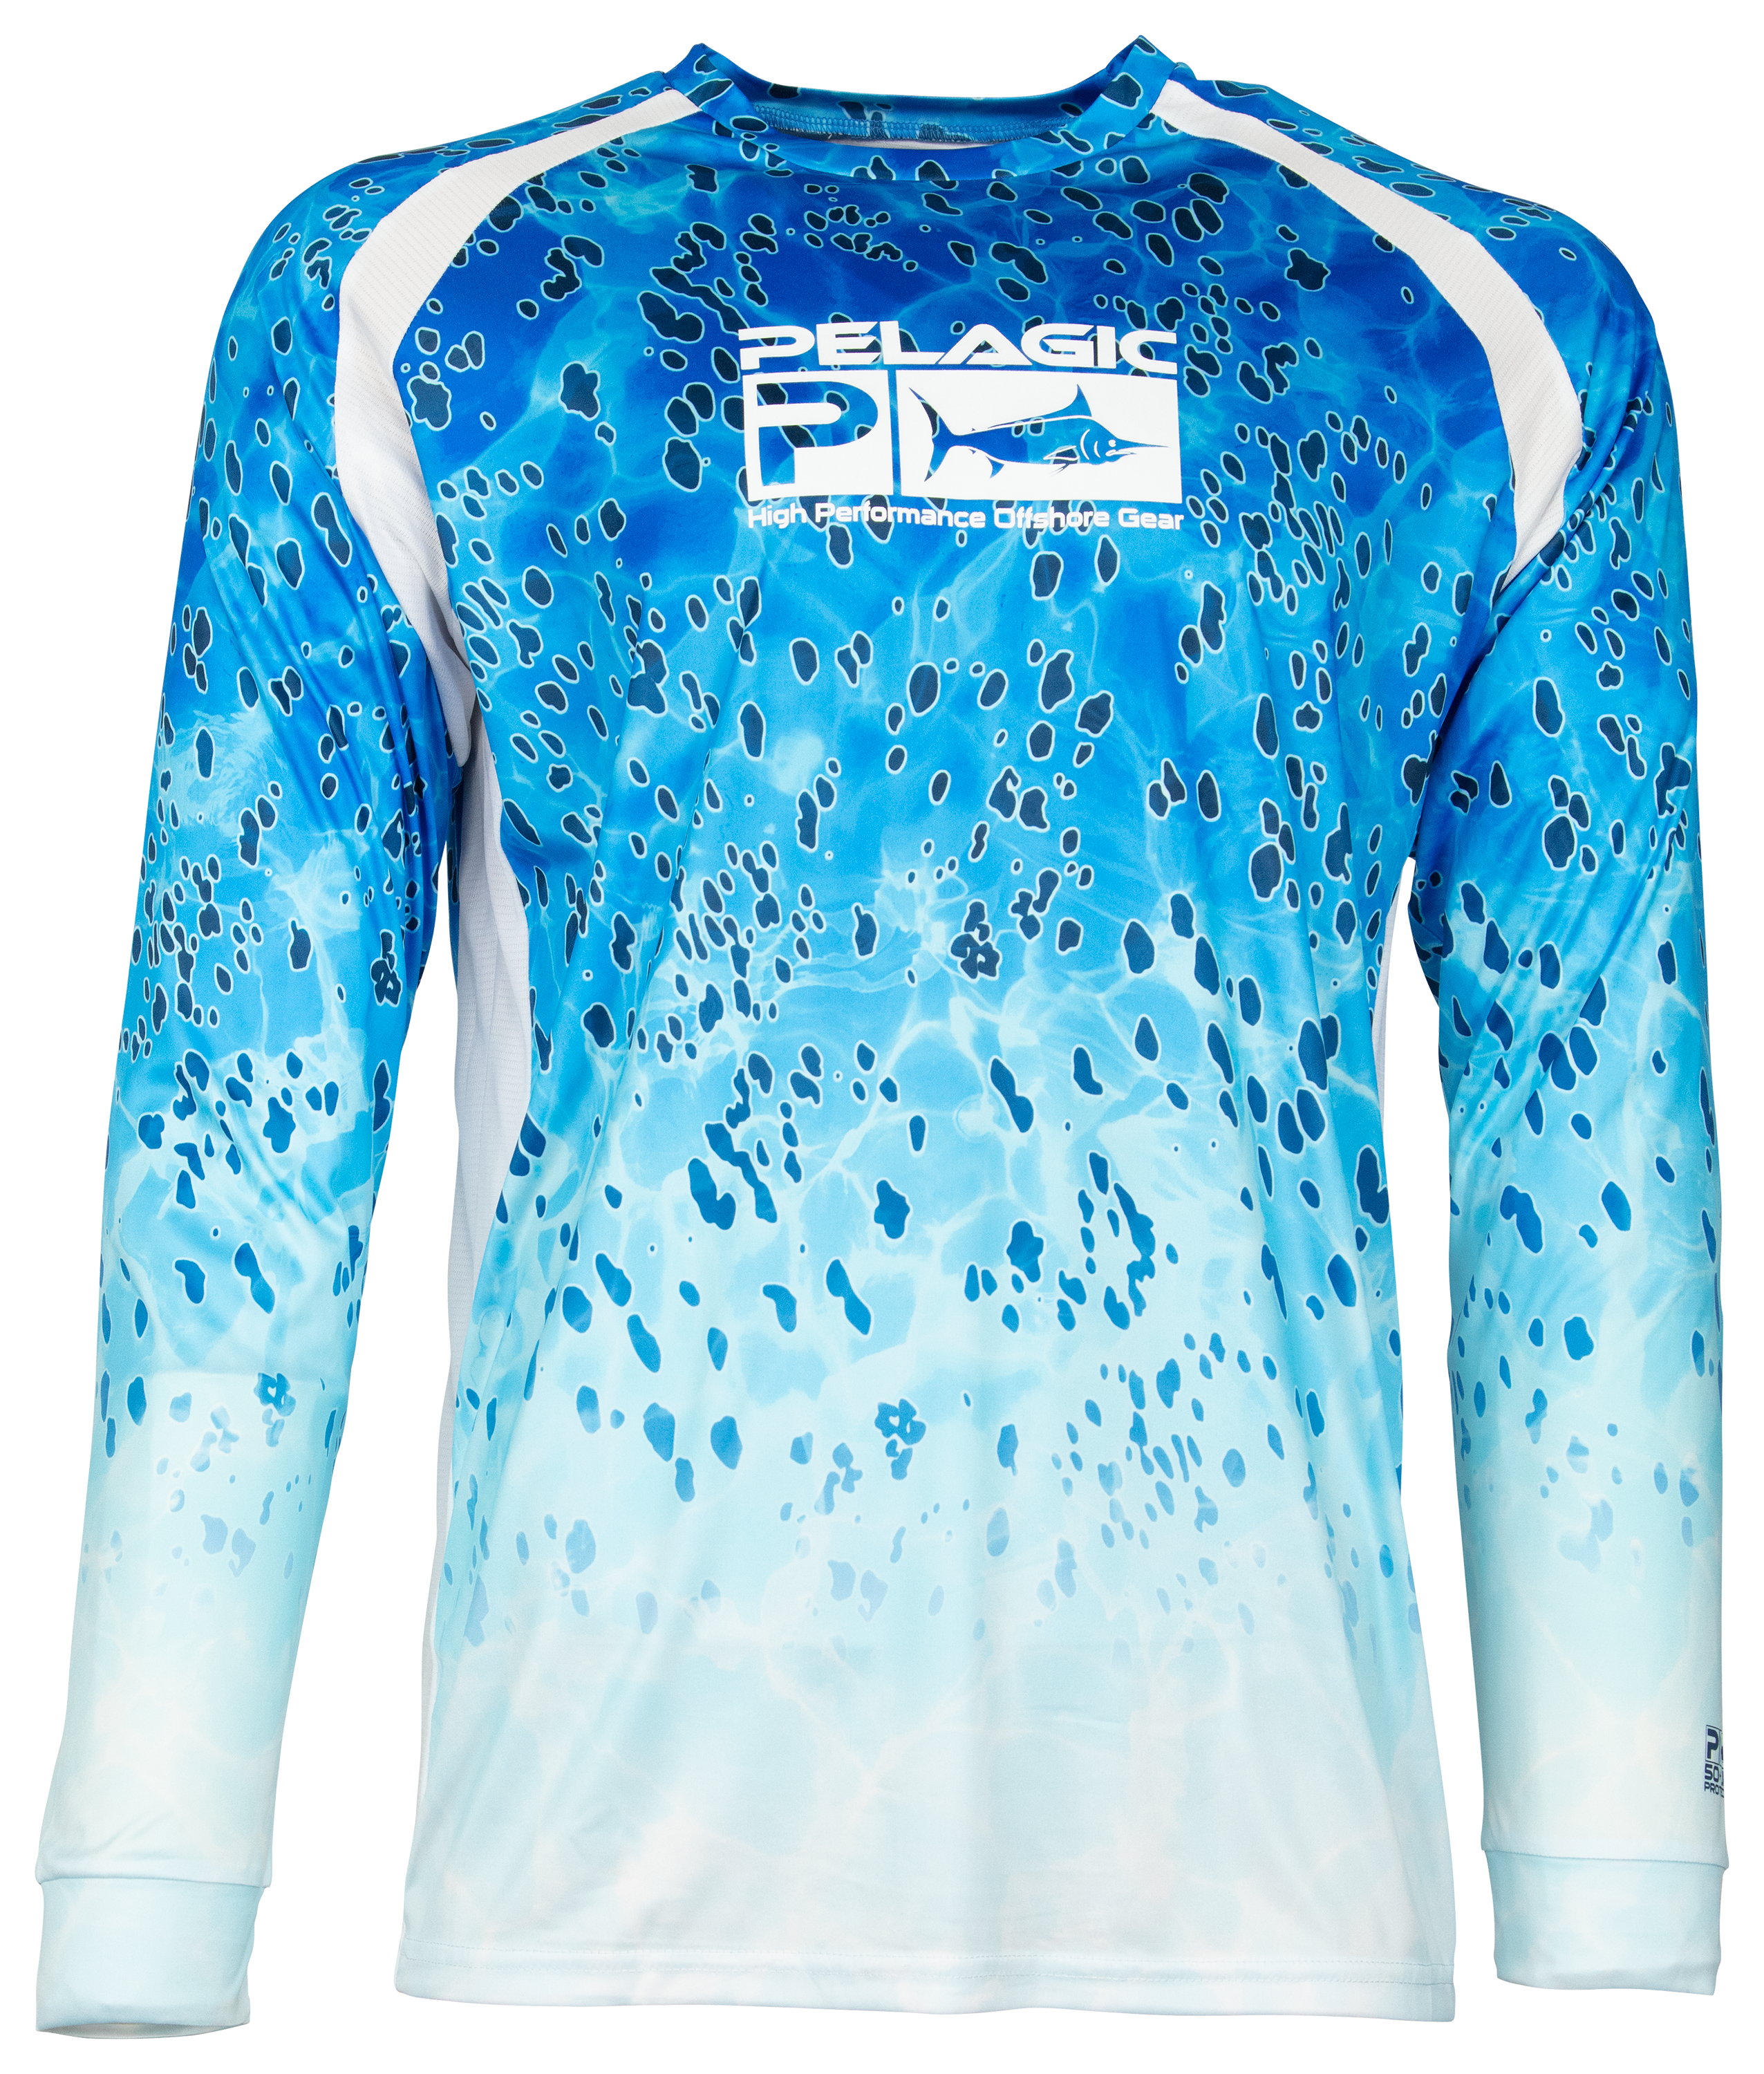  PELAGIC Men's Aquatek Twin Beeks Fishing Shirt, Long Sleeve,  UPF 50+ Protection, Ultra Soft Feel Water and Stain Repellent, Ocean :  Sports & Outdoors